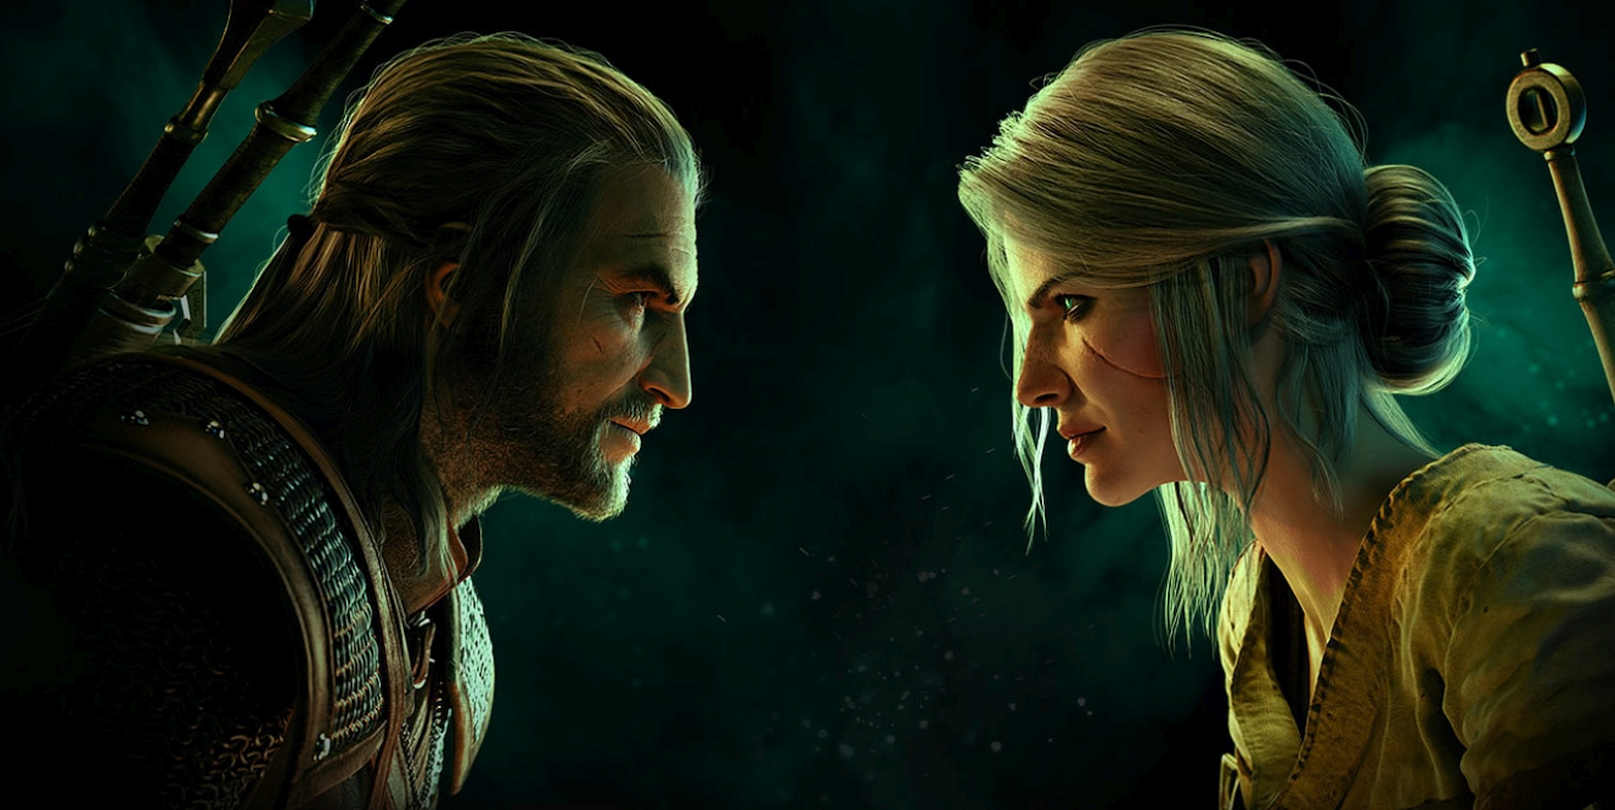 CD Projekt Red Announces The Witcher Game Series Has Sold More Than 50 Million Copies Worldwide